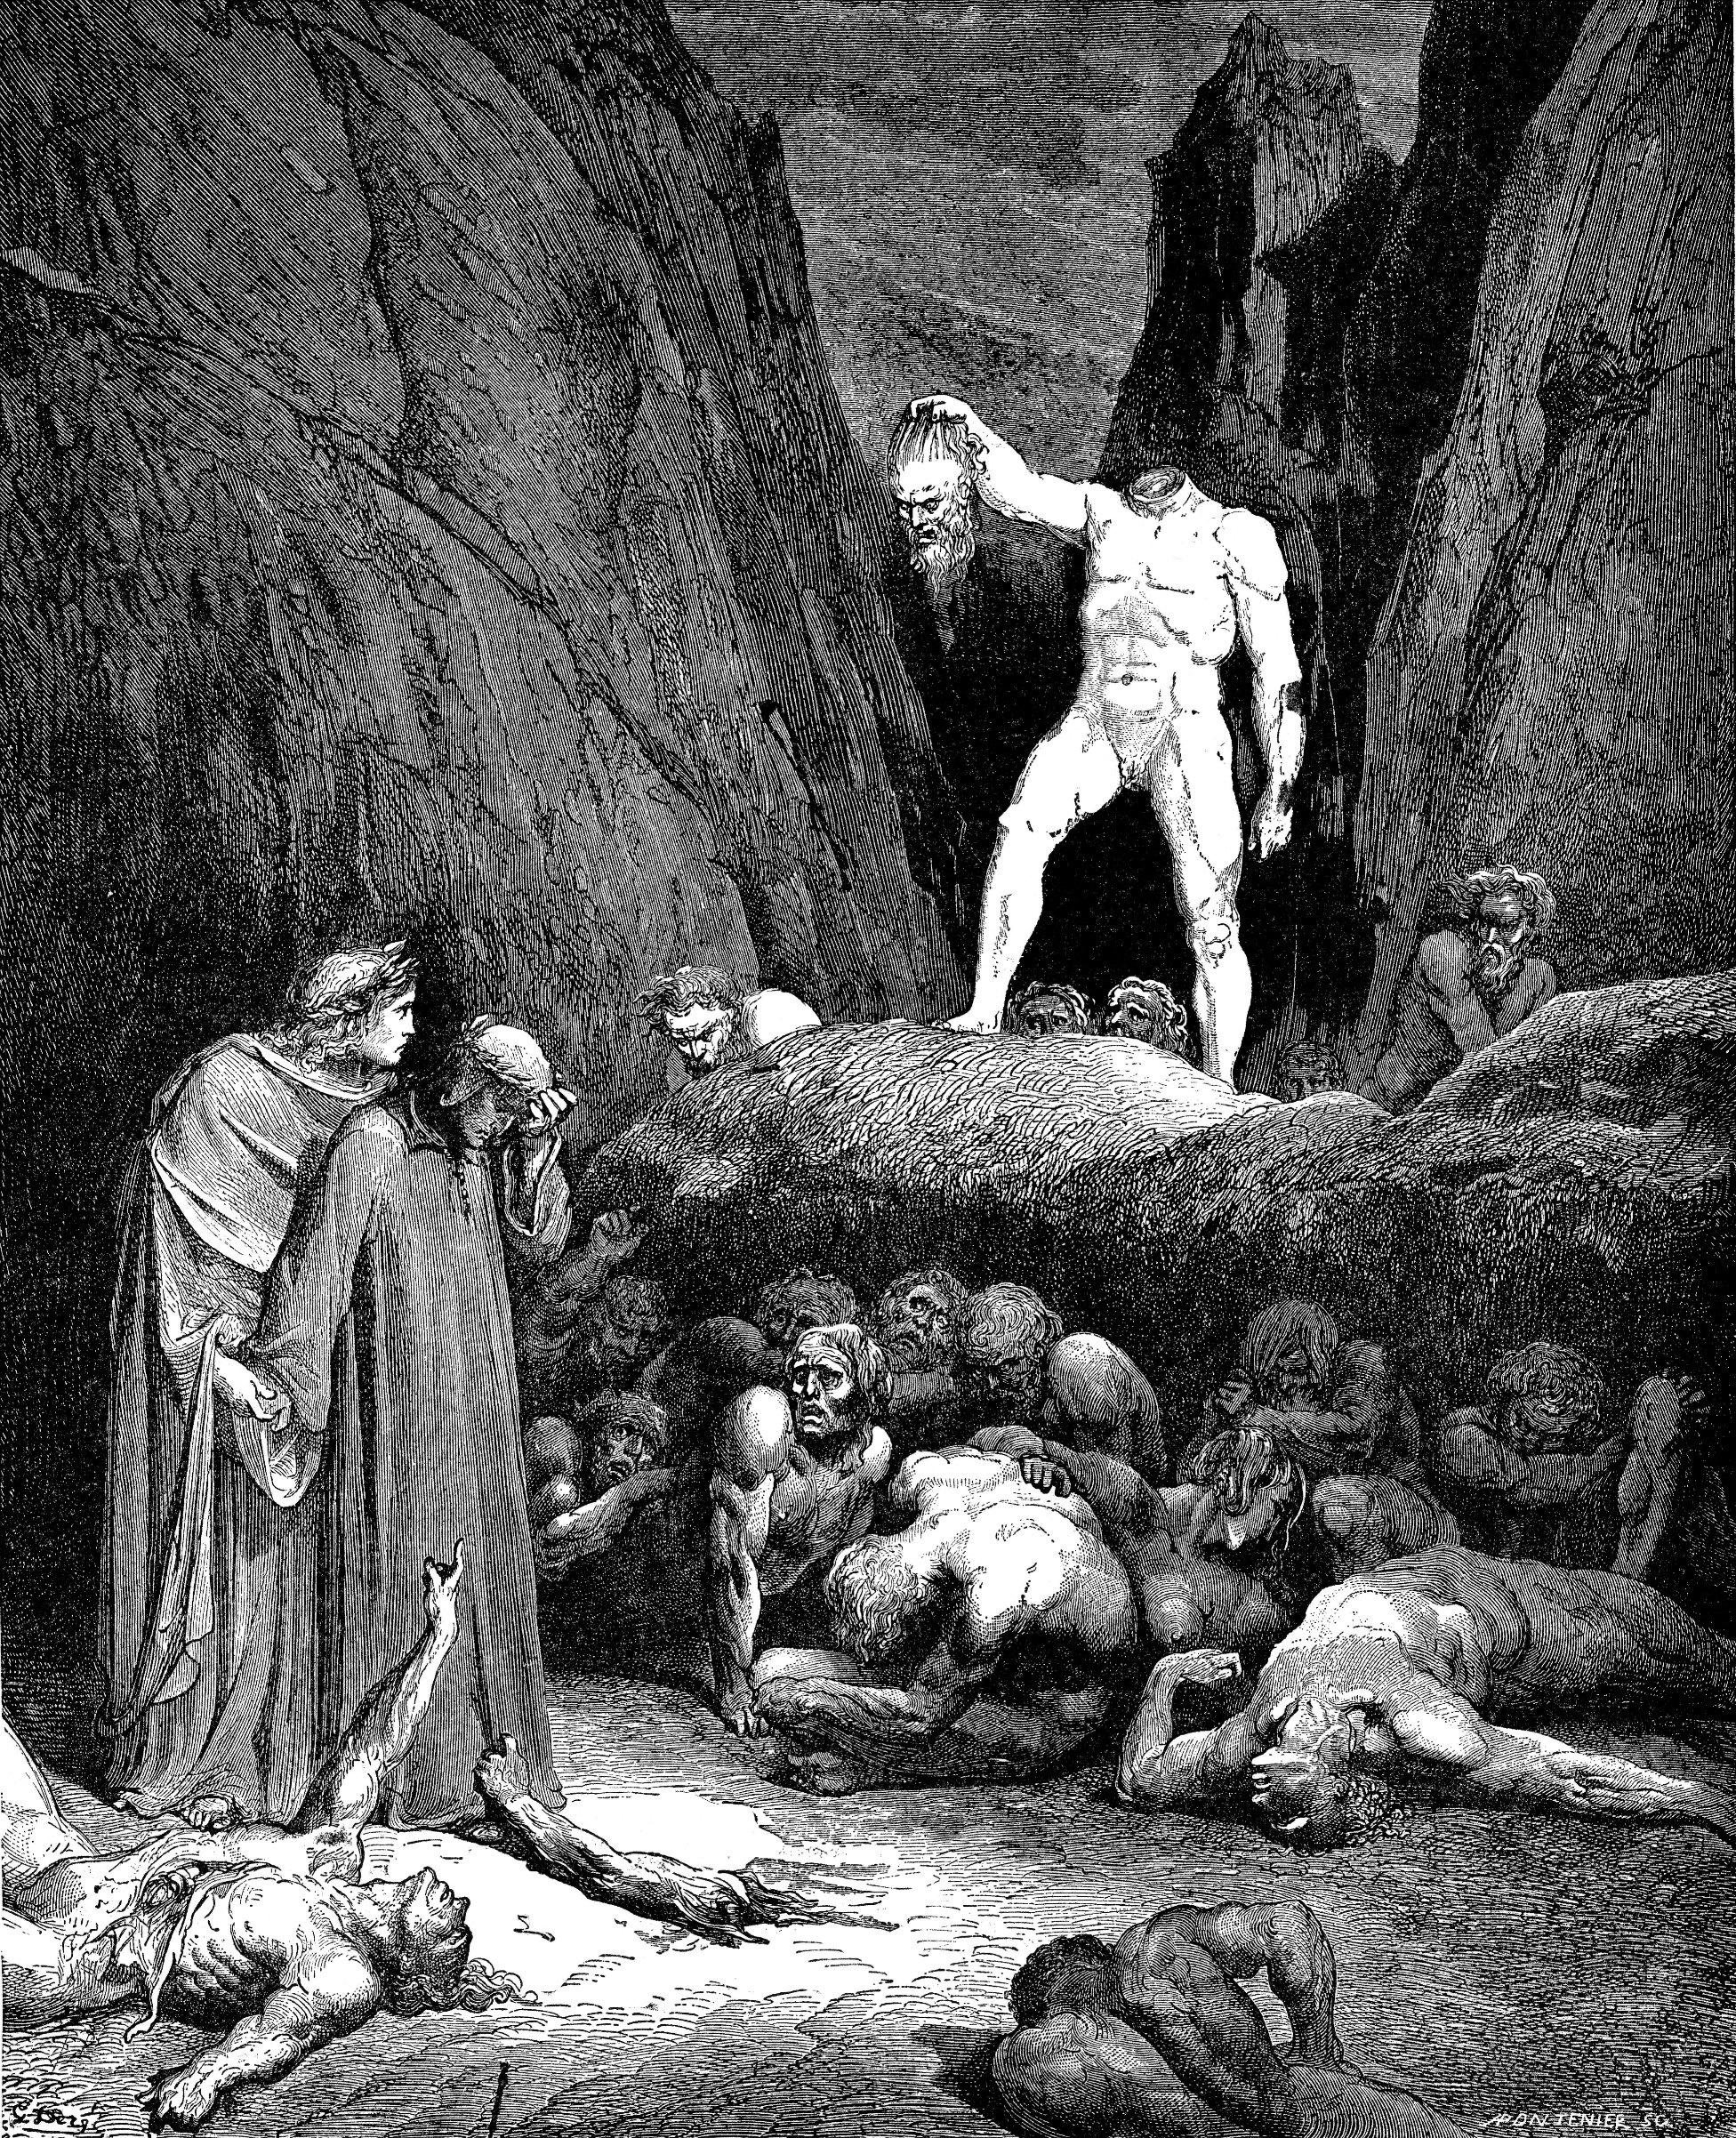 The Road to Hell: Dantes Inferno and the Undermining of Trust